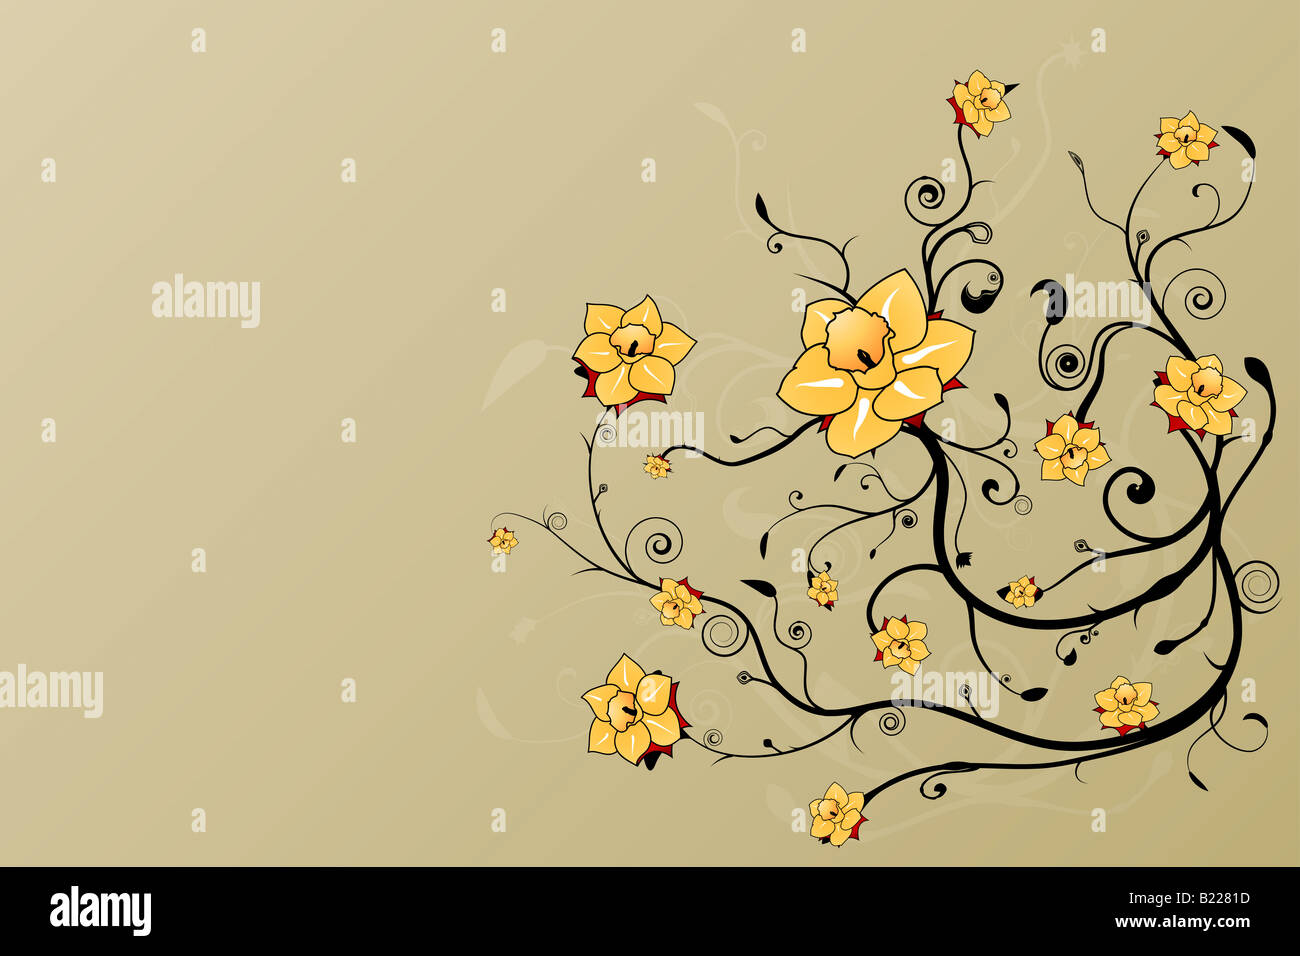 Vector illustration of a beautiful floral grunge background with stylized flowers and art spirals Stock Photo